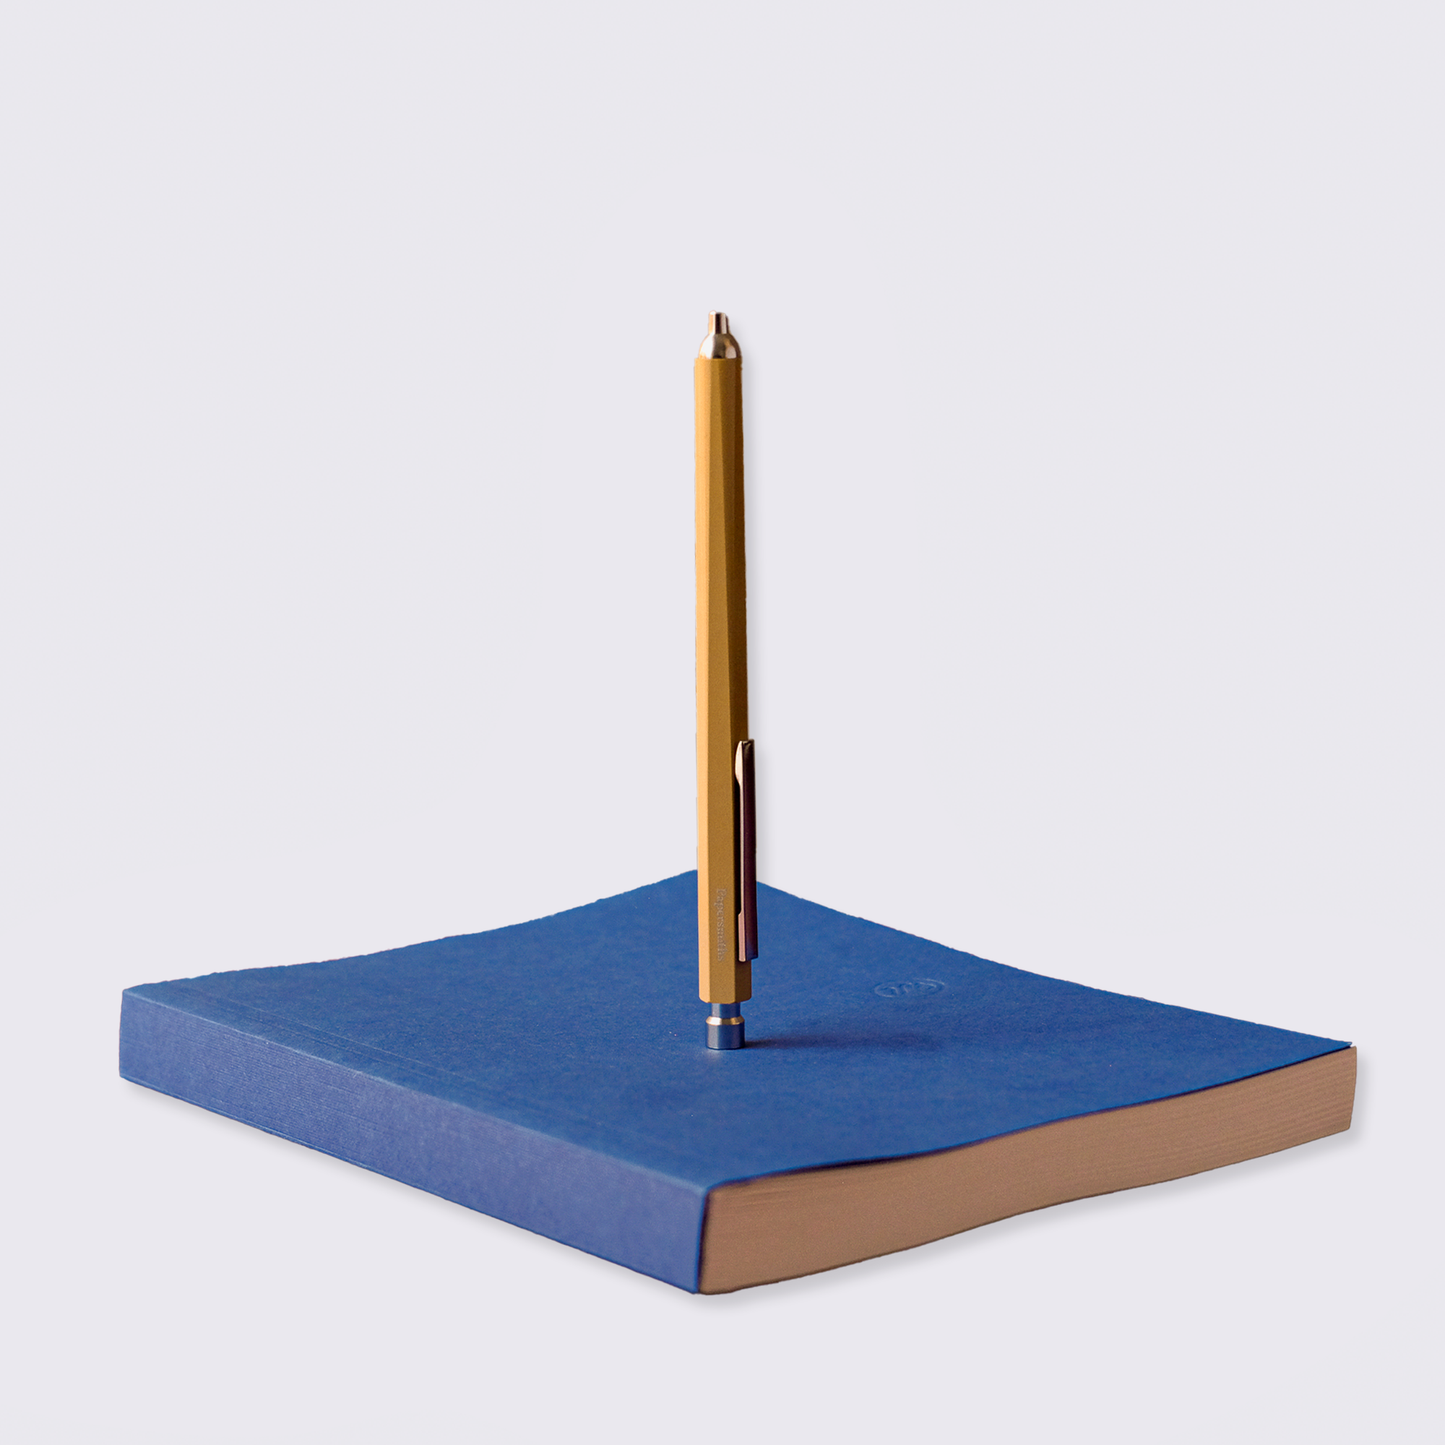 Azurite Notebook and Pen Duo - Primo Ballpoint Pen / Dot Grid Paper